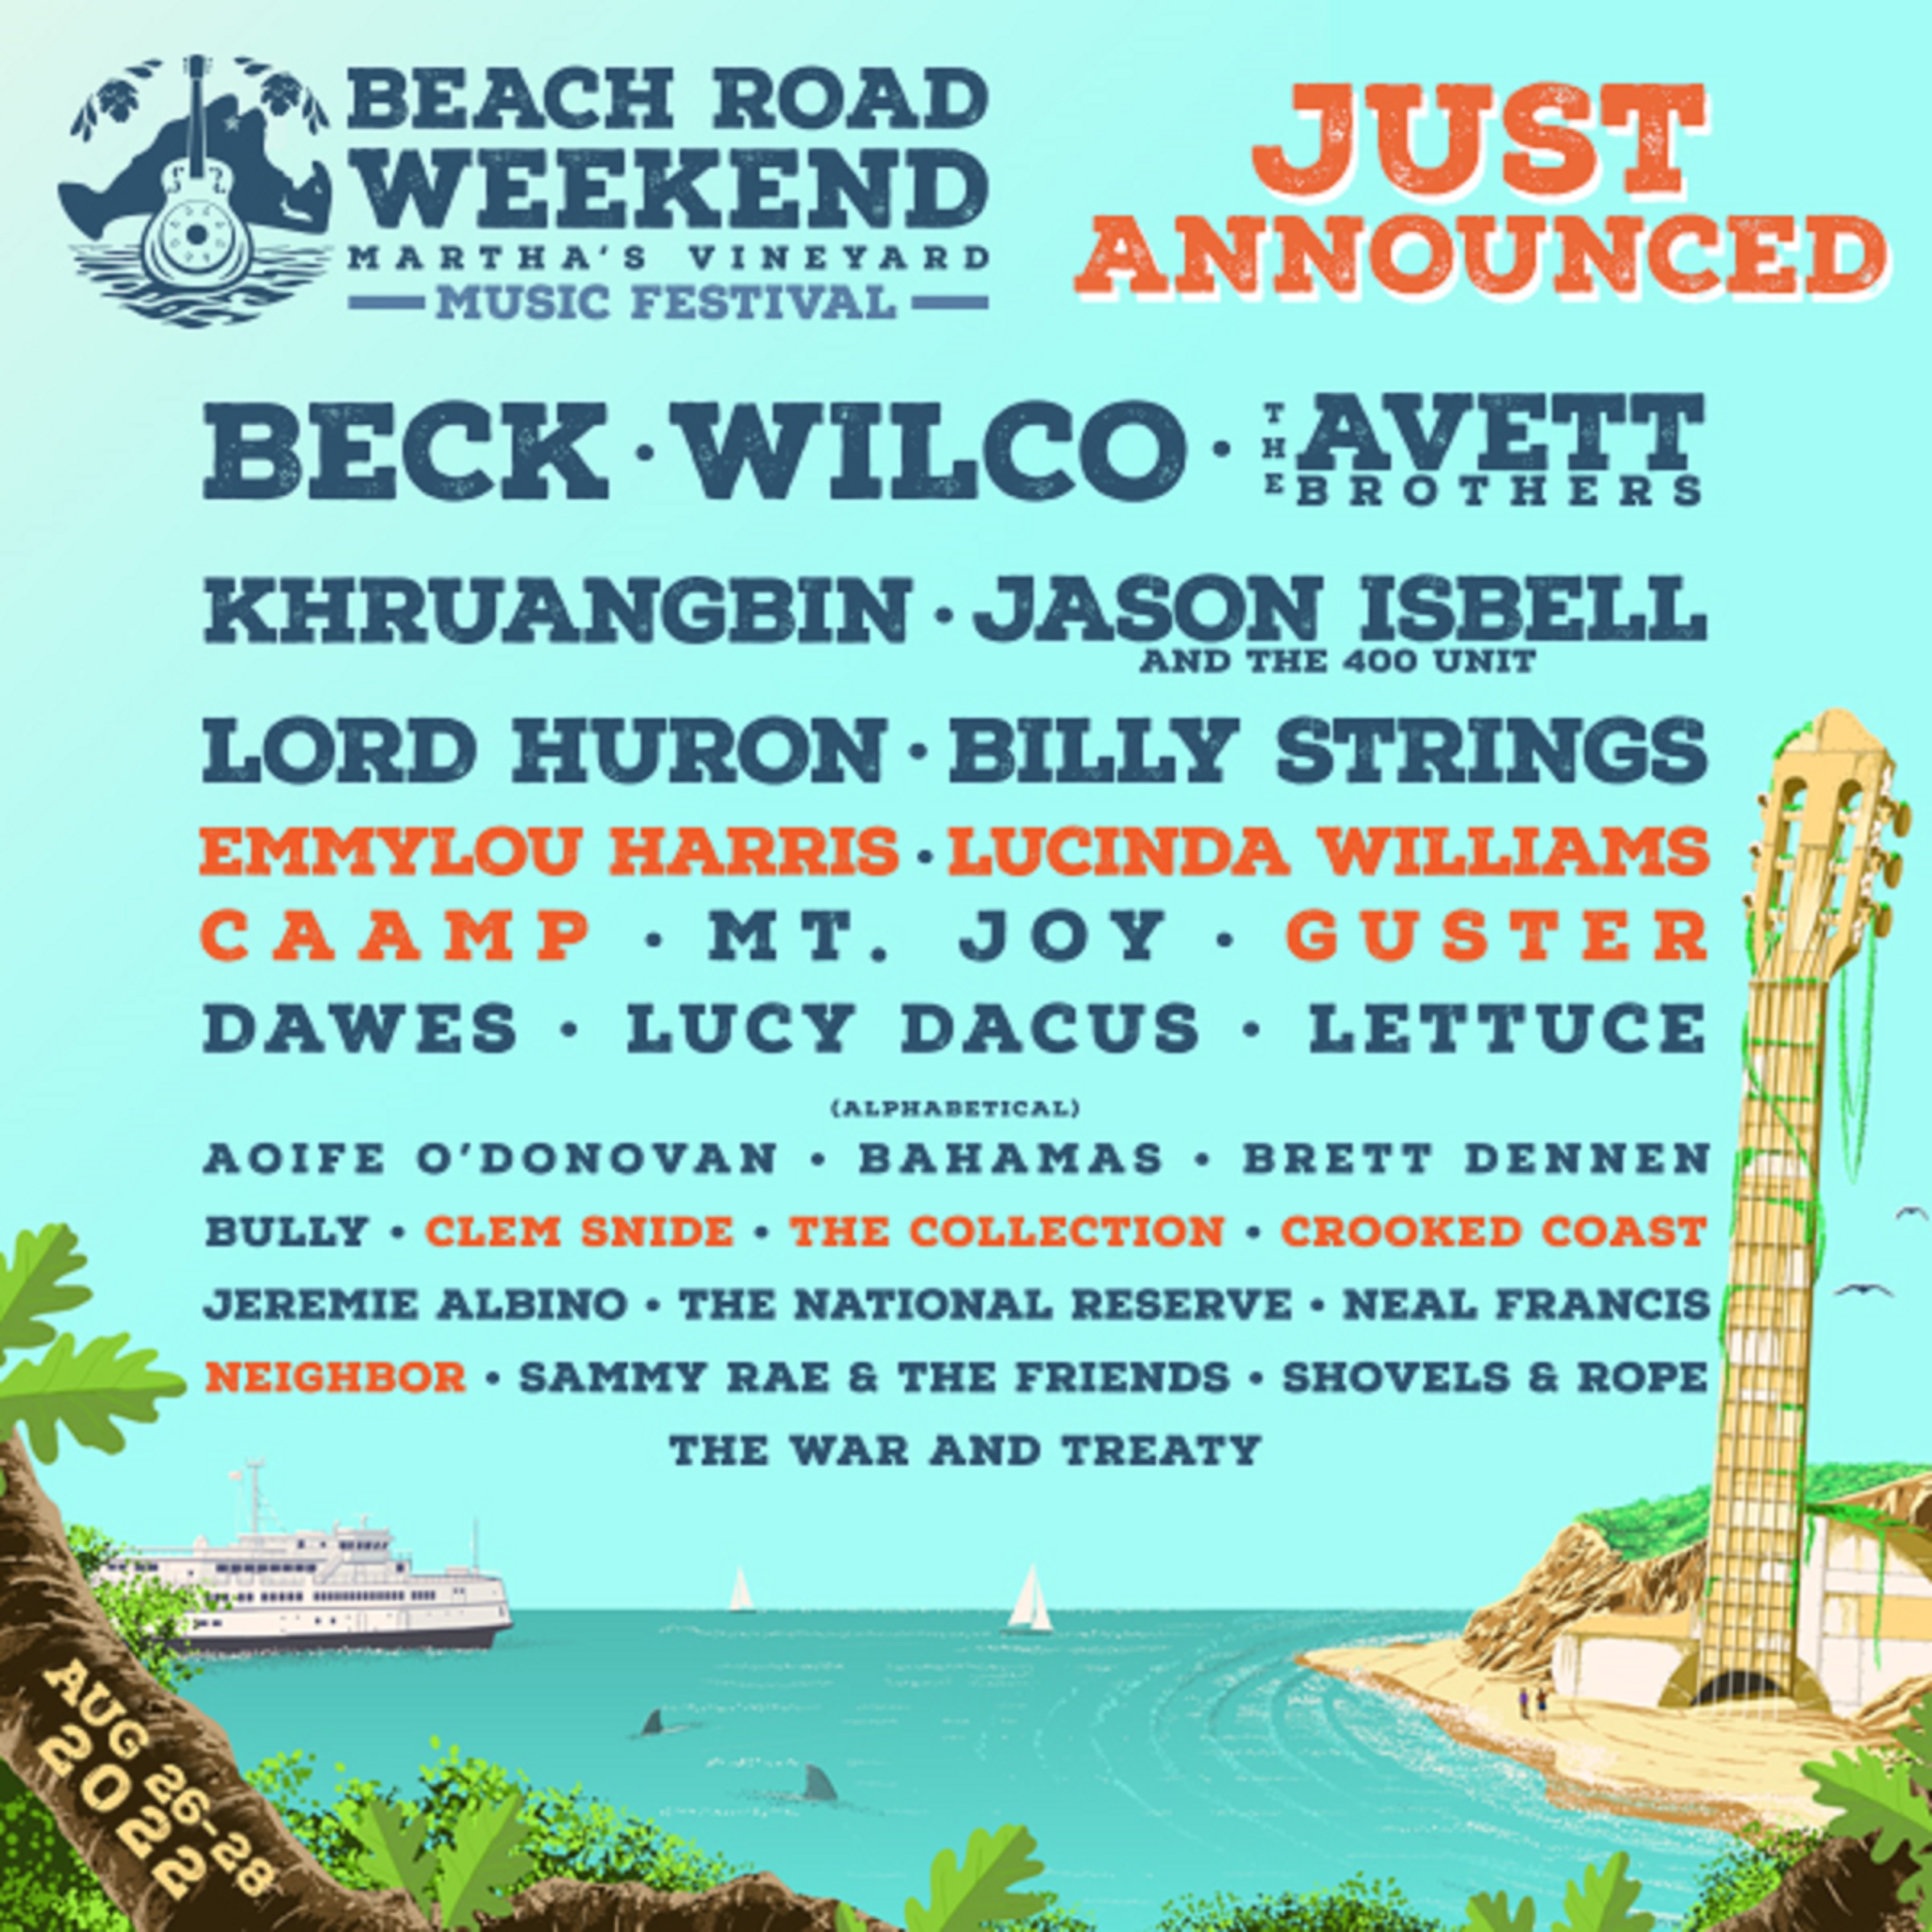 Emmylou Harris, Lucinda Williams, Caamp, Guster and more join the Beach